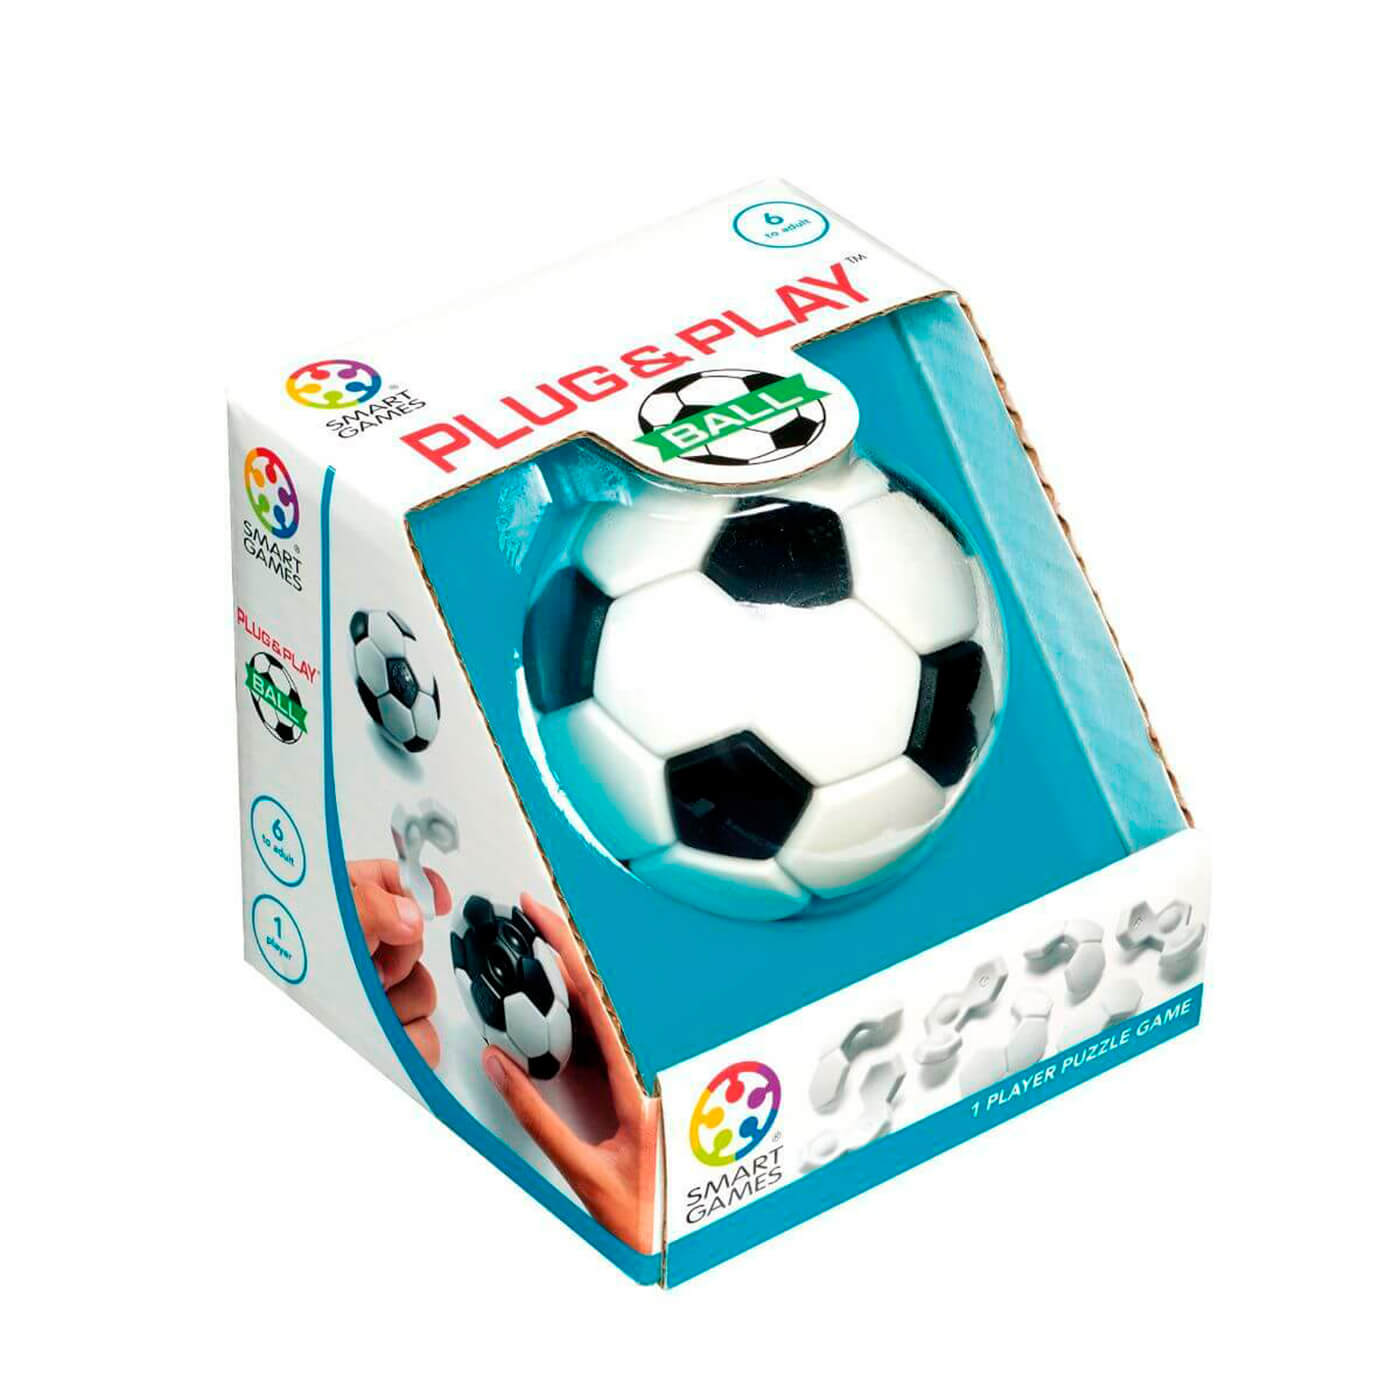 Plug and Play Football, Puzzle game